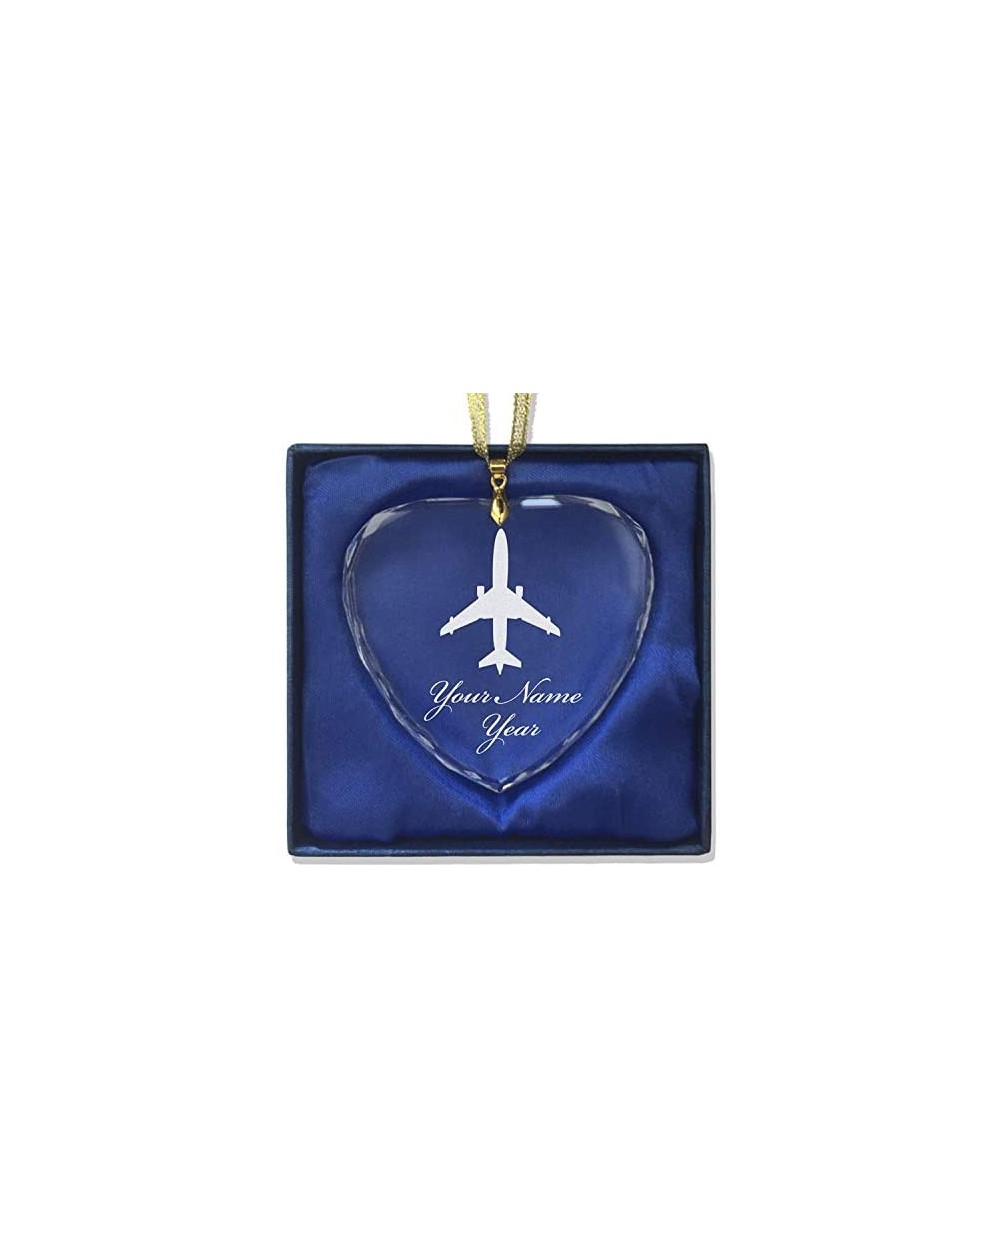 Ornaments Christmas Ornament- Jet Airplane- Personalized Engraving Included (Heart Shape) - C518QDWEEL4 $24.73